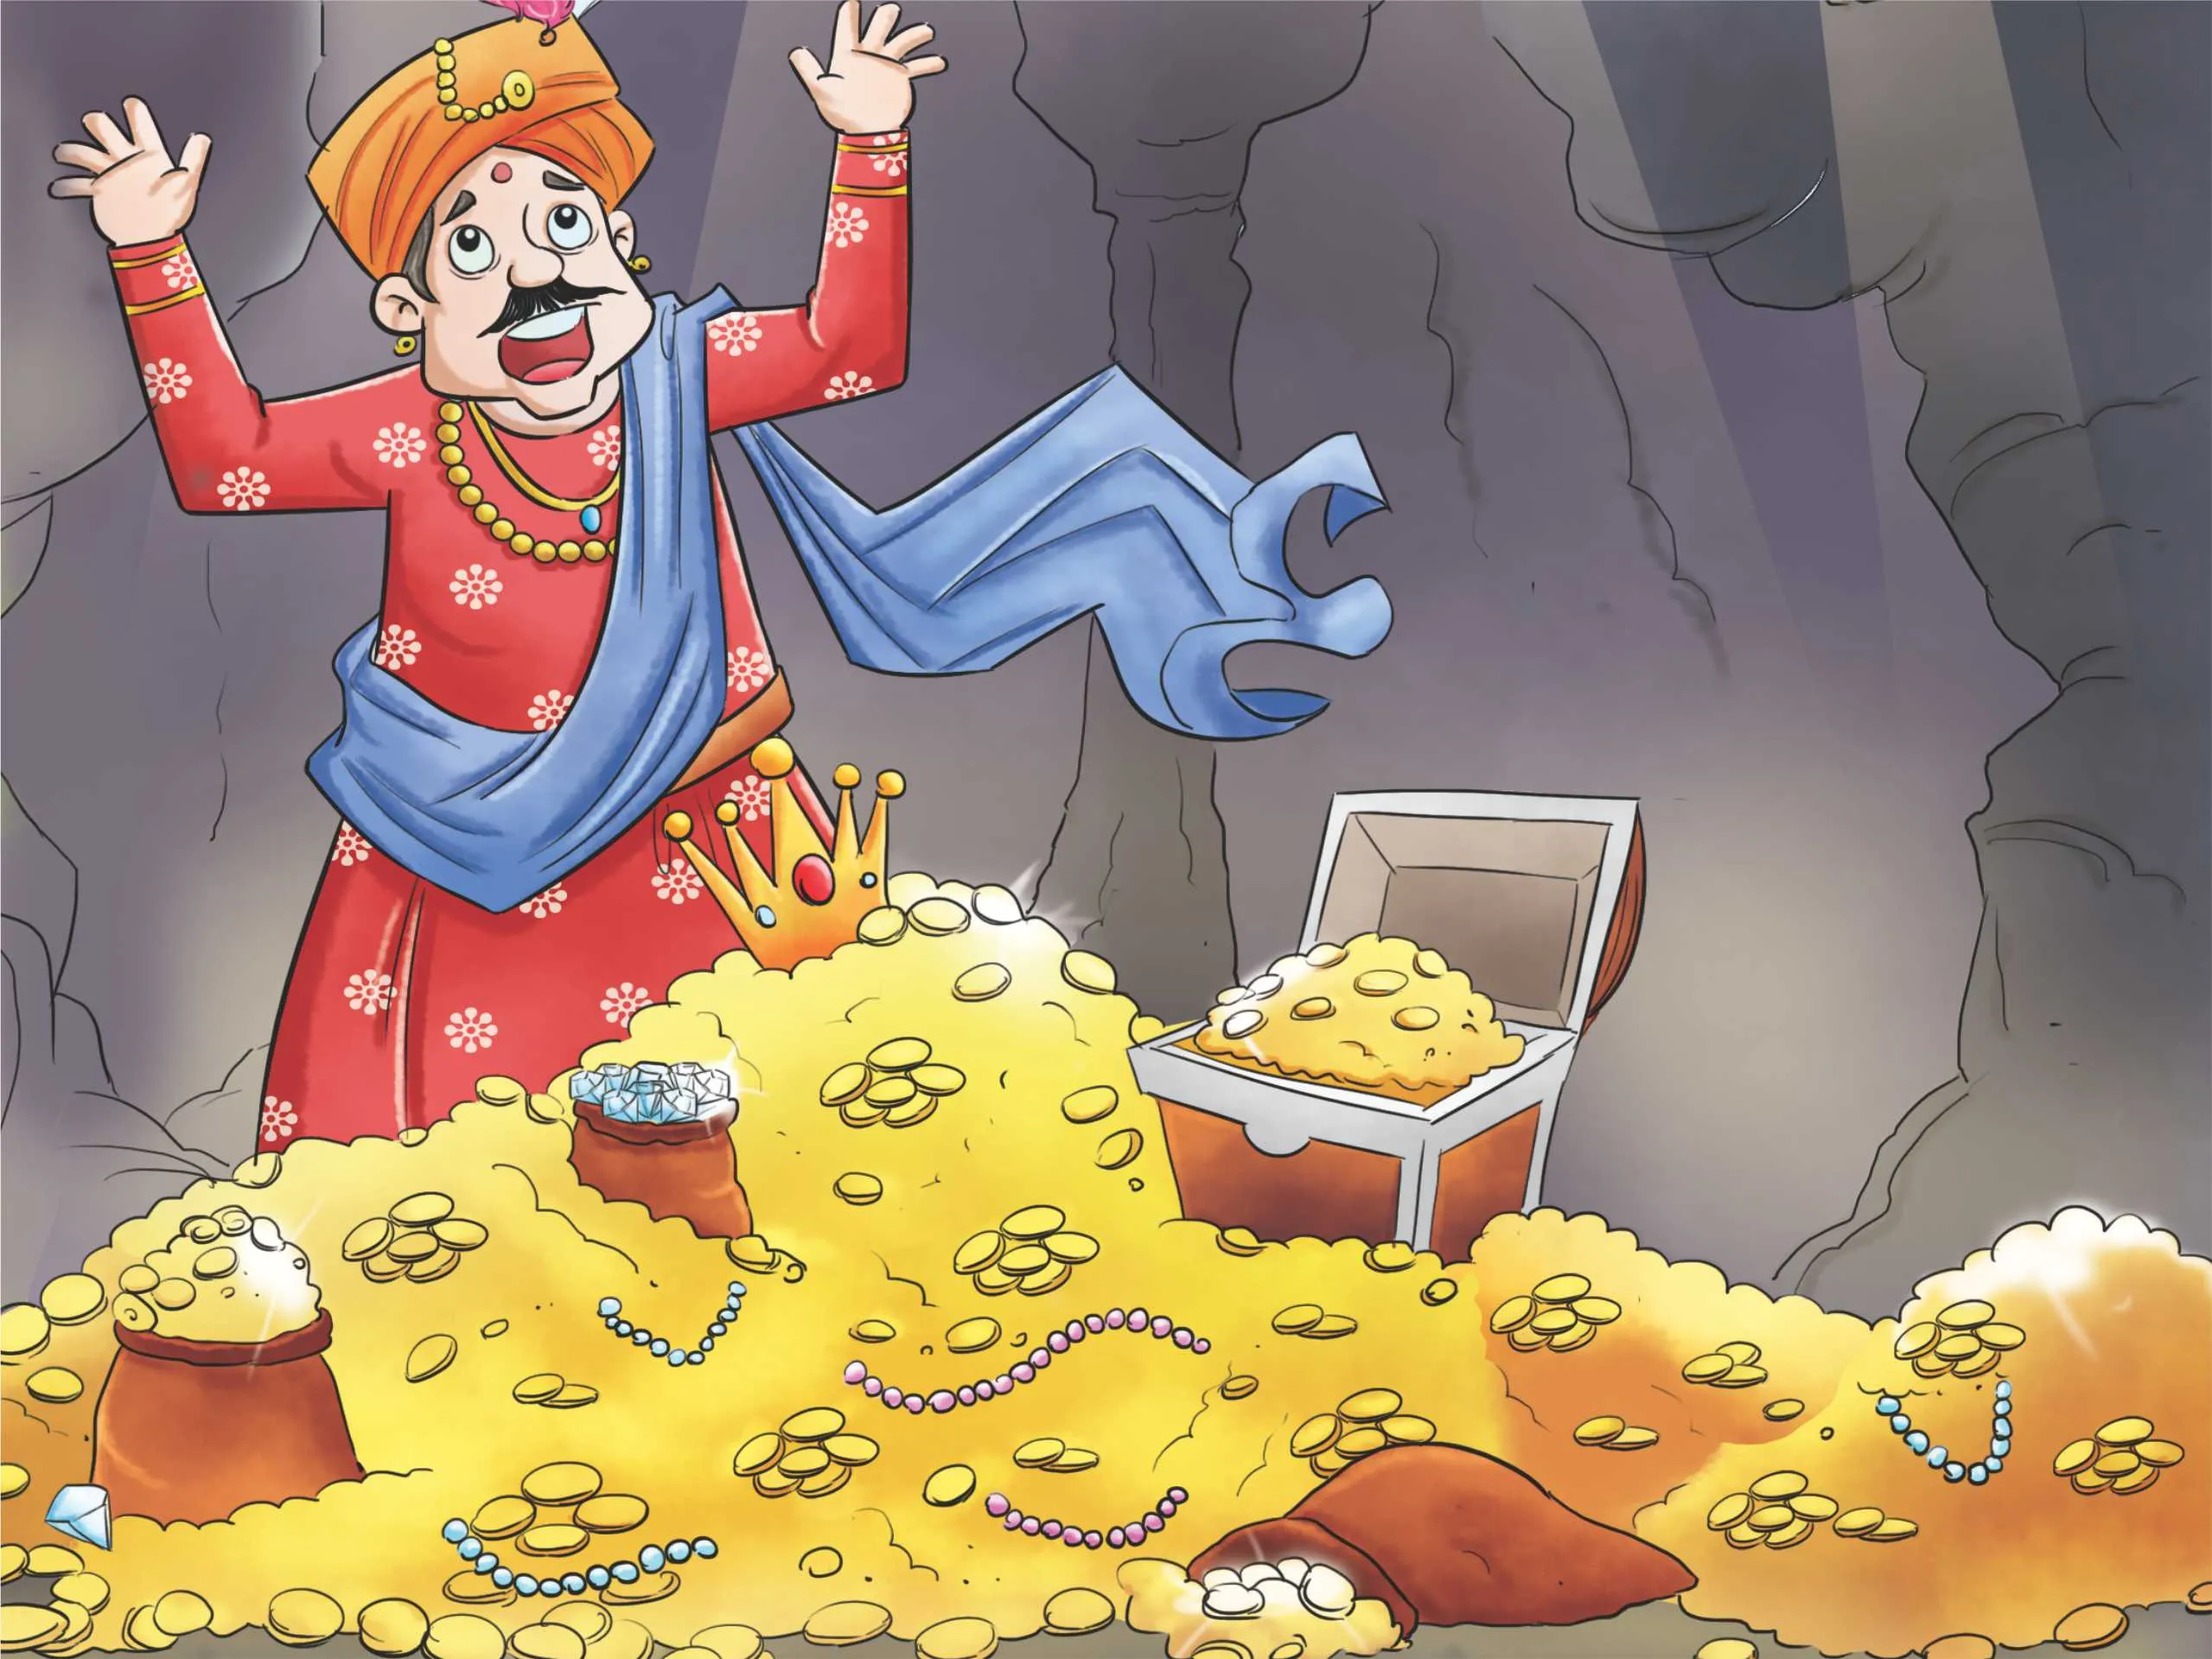 Cartoon image of a king king with its wealth